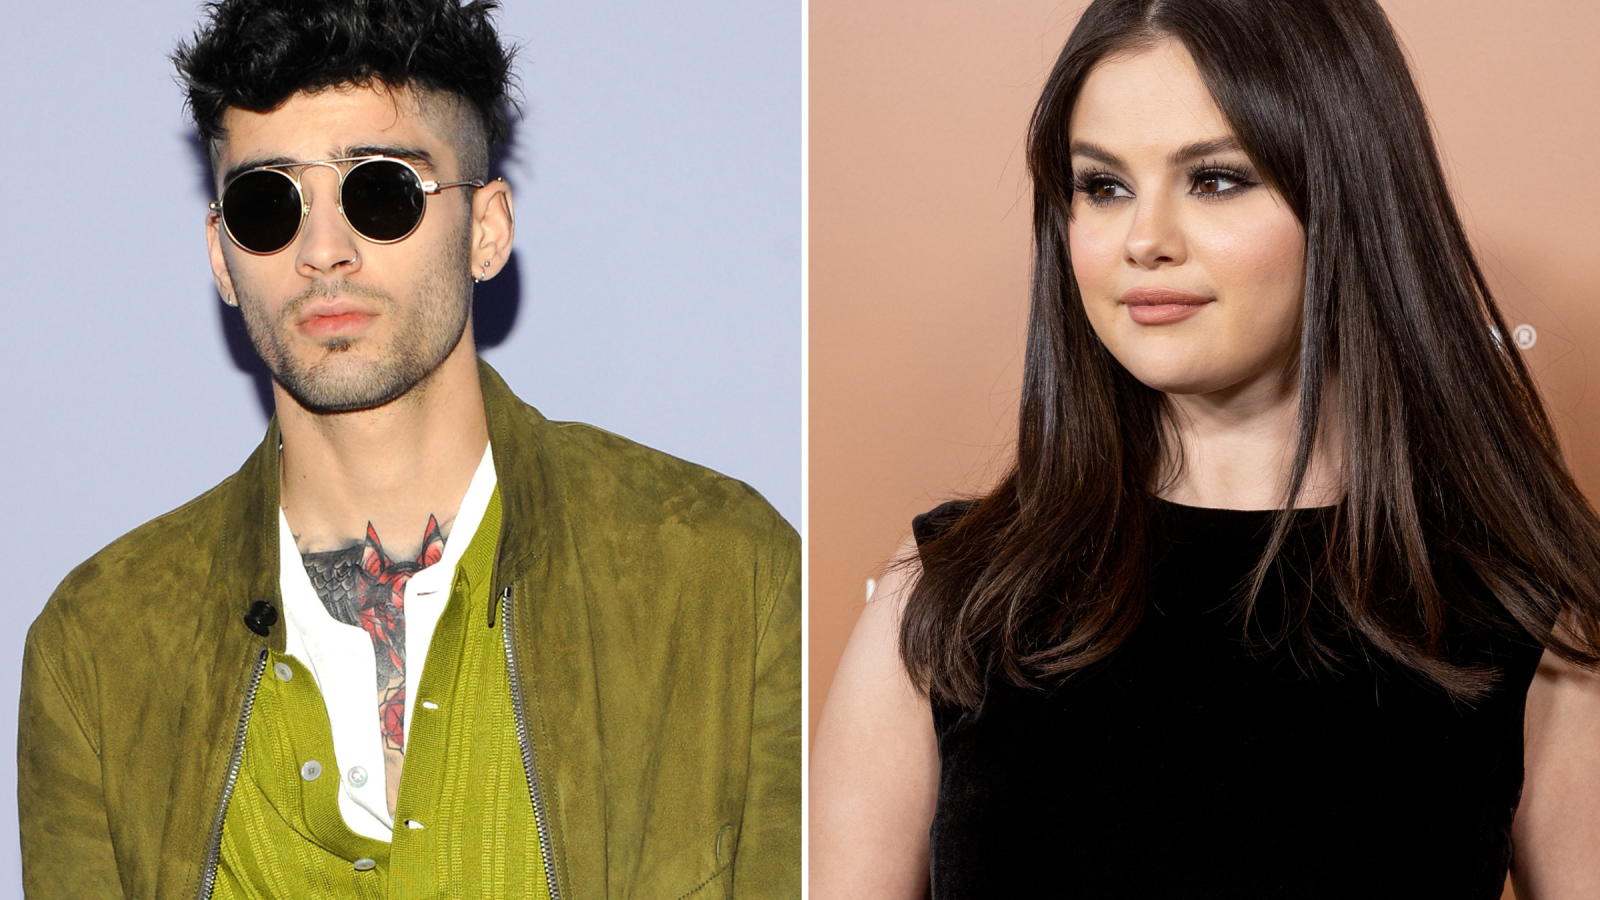 Are Zayn Malik and Selena Gomez Dating? What We Know So Far